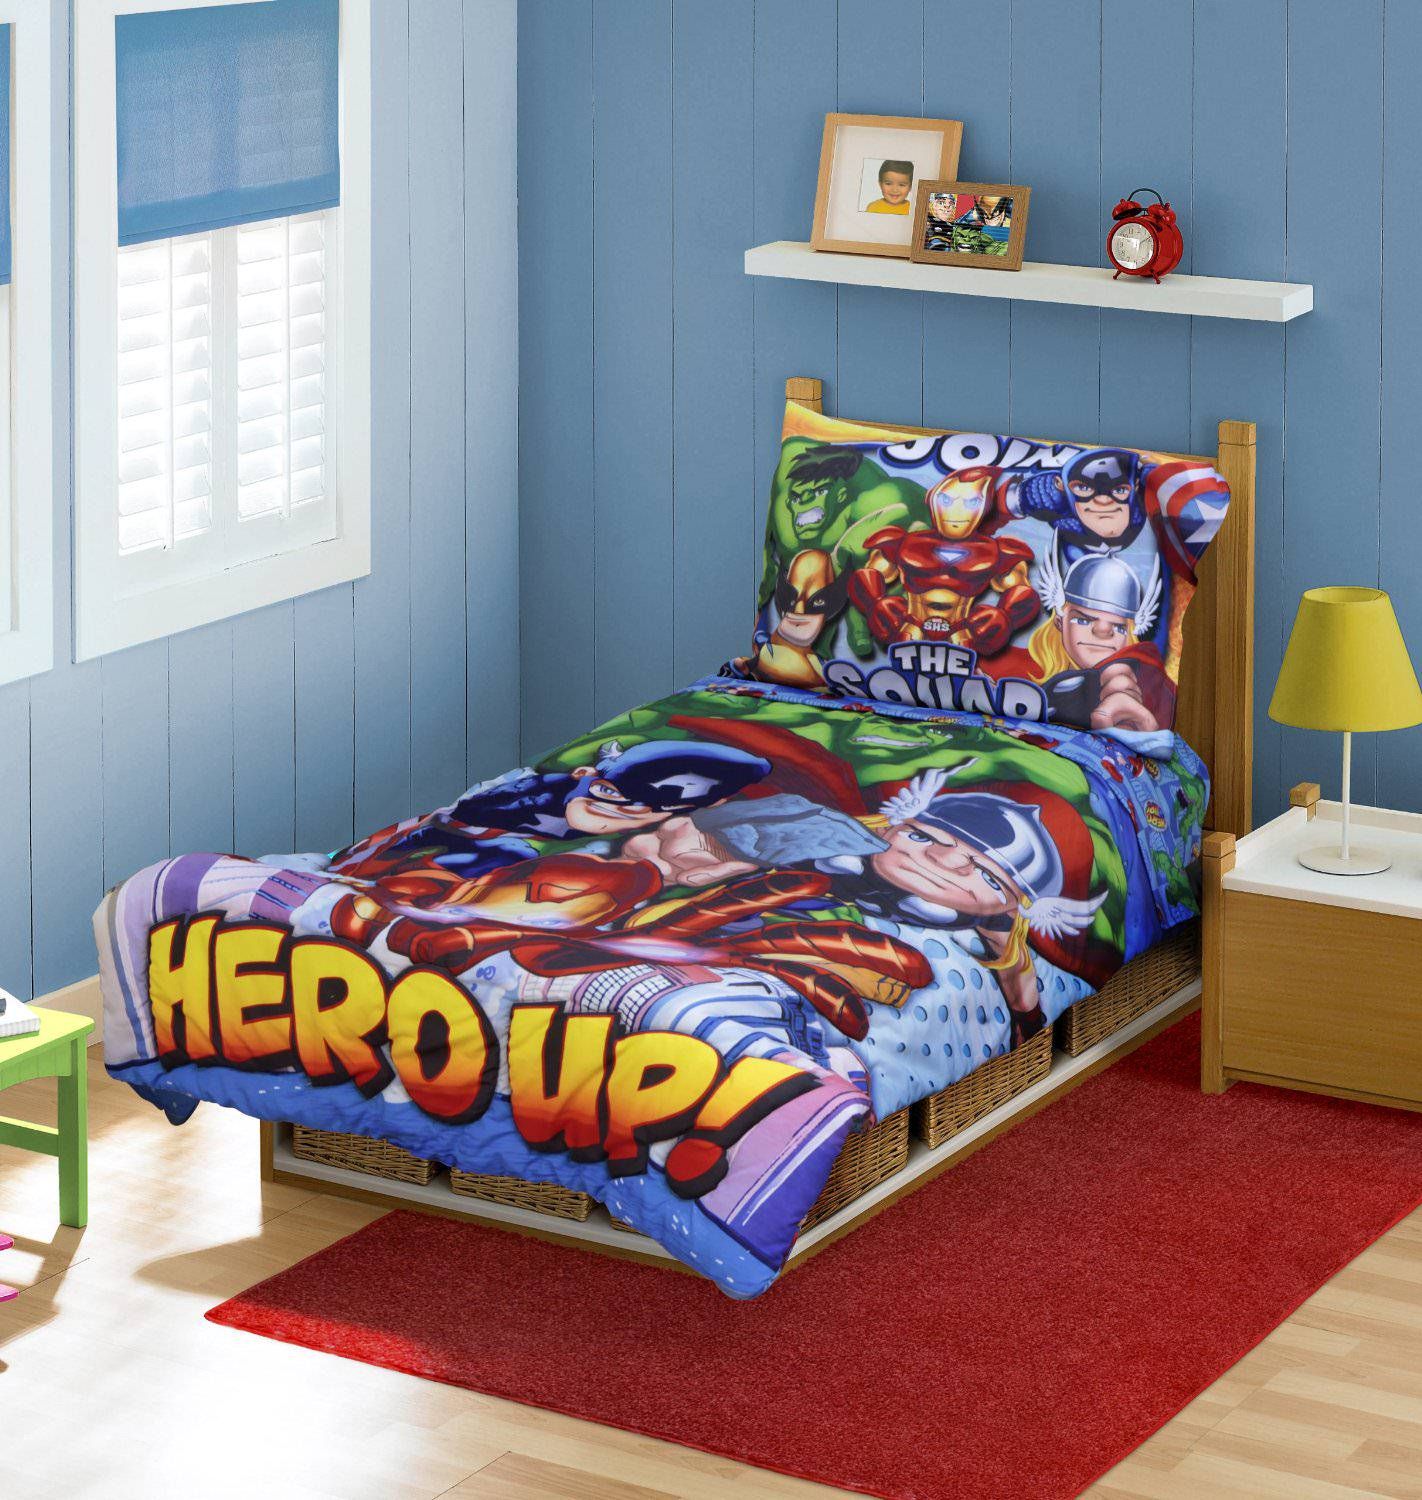 Hero Up Bedding (View 10 of 10)